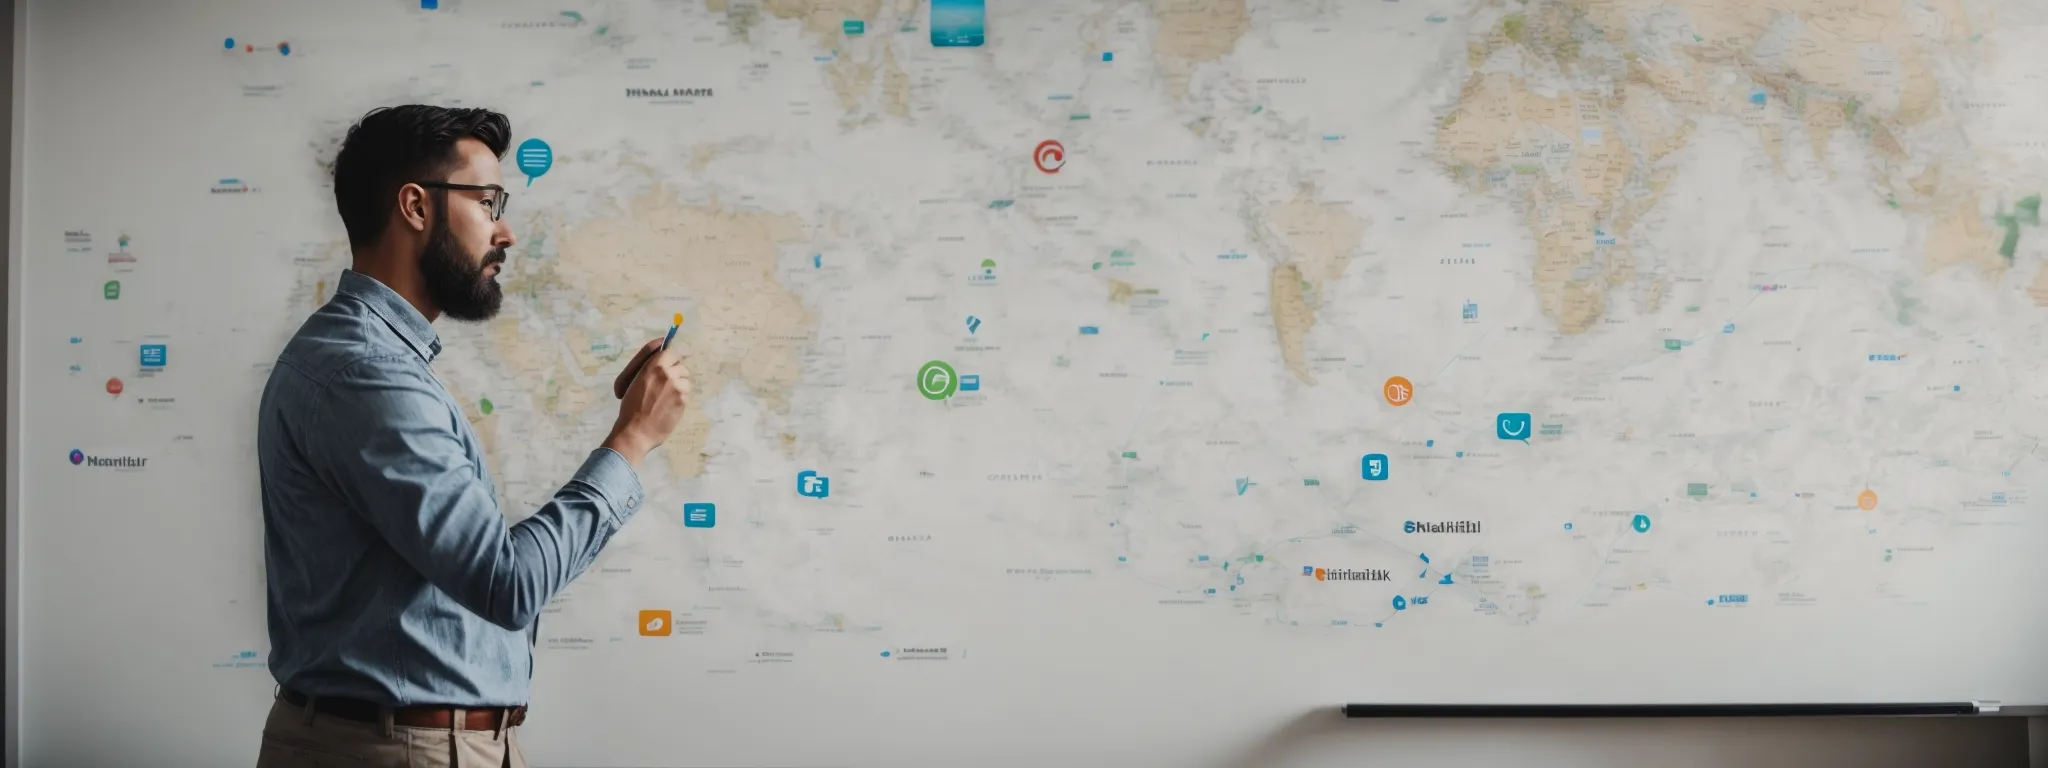 a marketer brainstorming a backlink strategy on a whiteboard with a world map and networking icons.